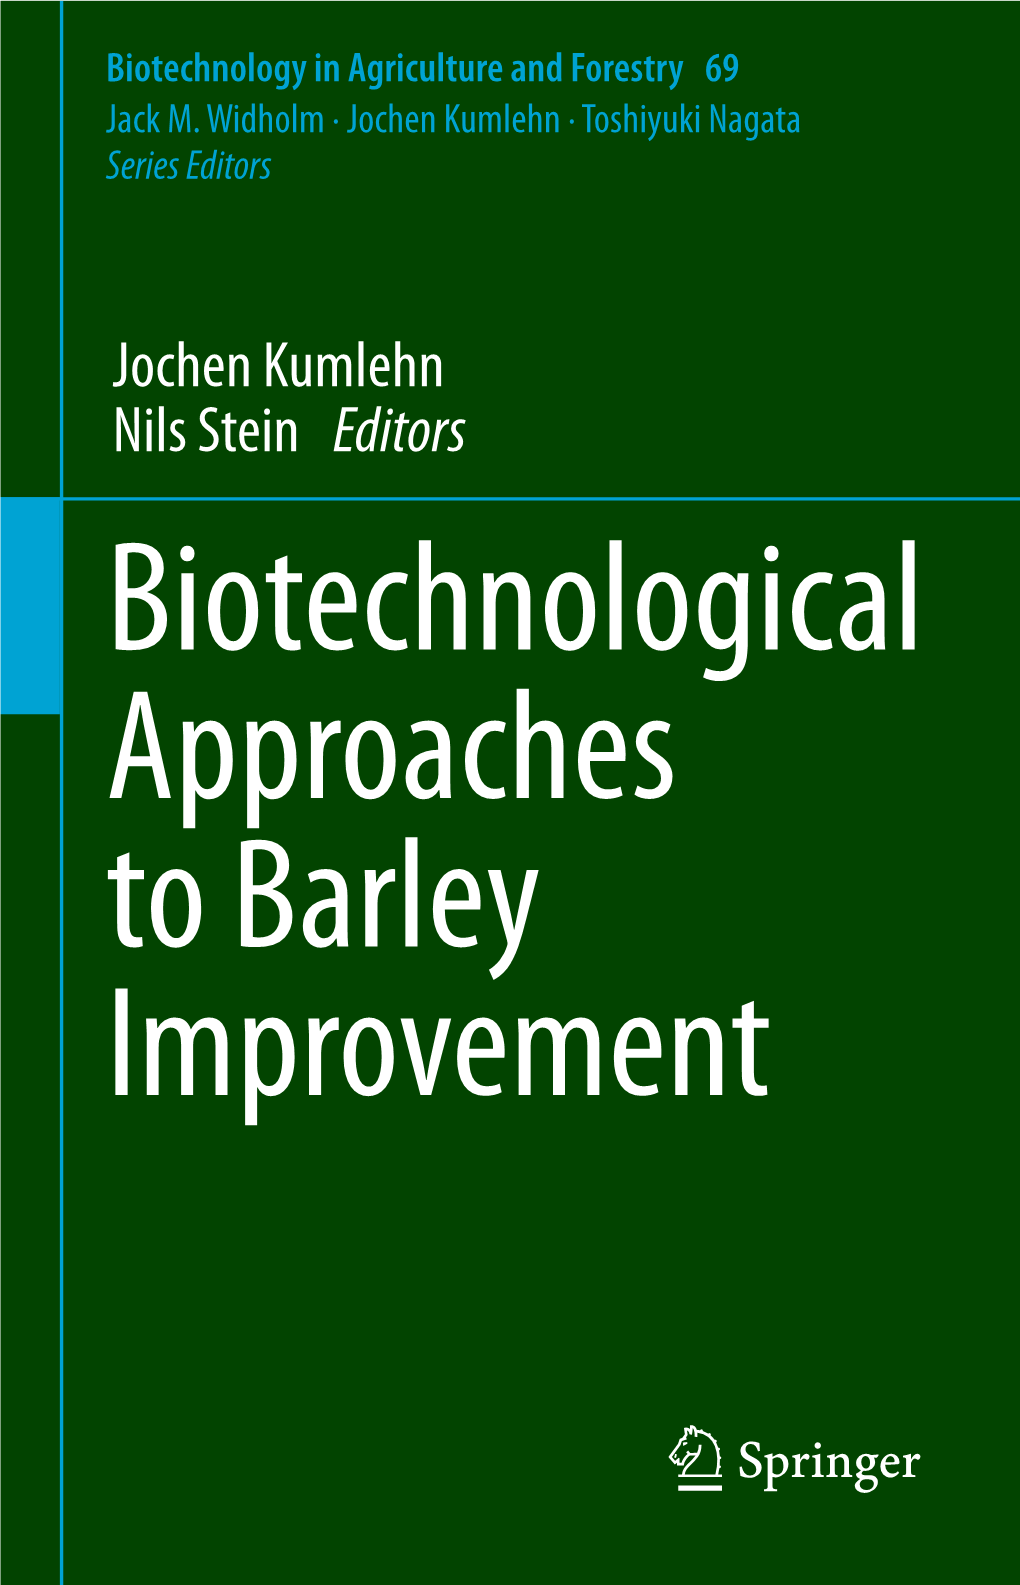 Jochen Kumlehn Nils Stein Editors Biotechnological Approaches to Barley Improvement Biotechnology in Agriculture and Forestry